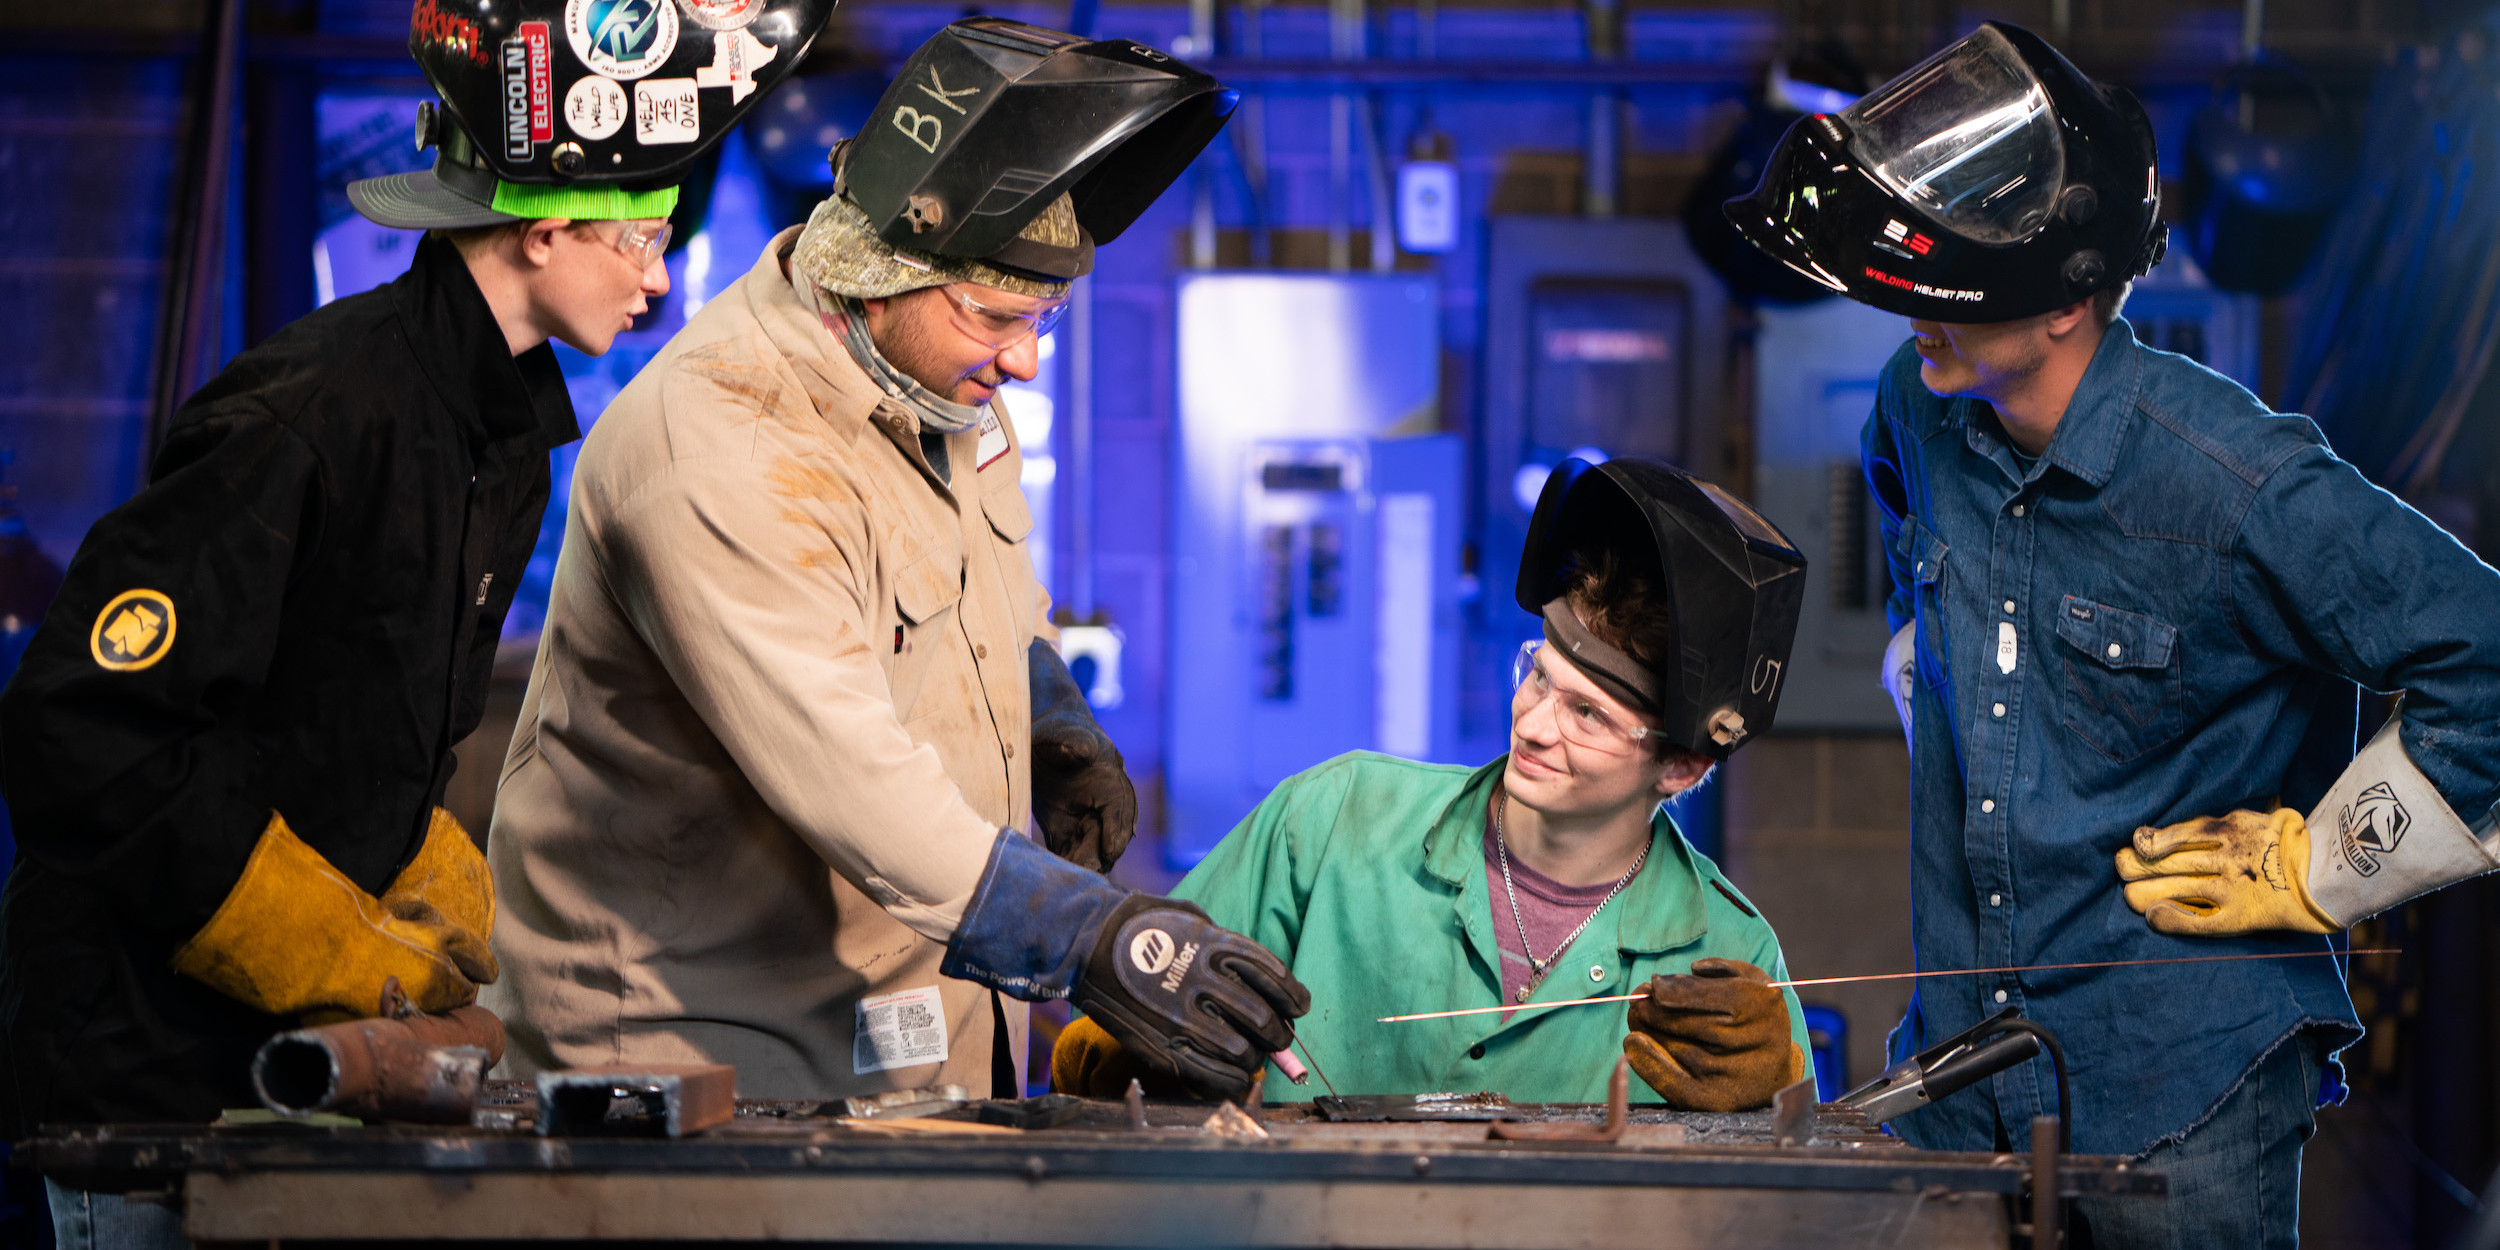 A teacher showing students how to weld